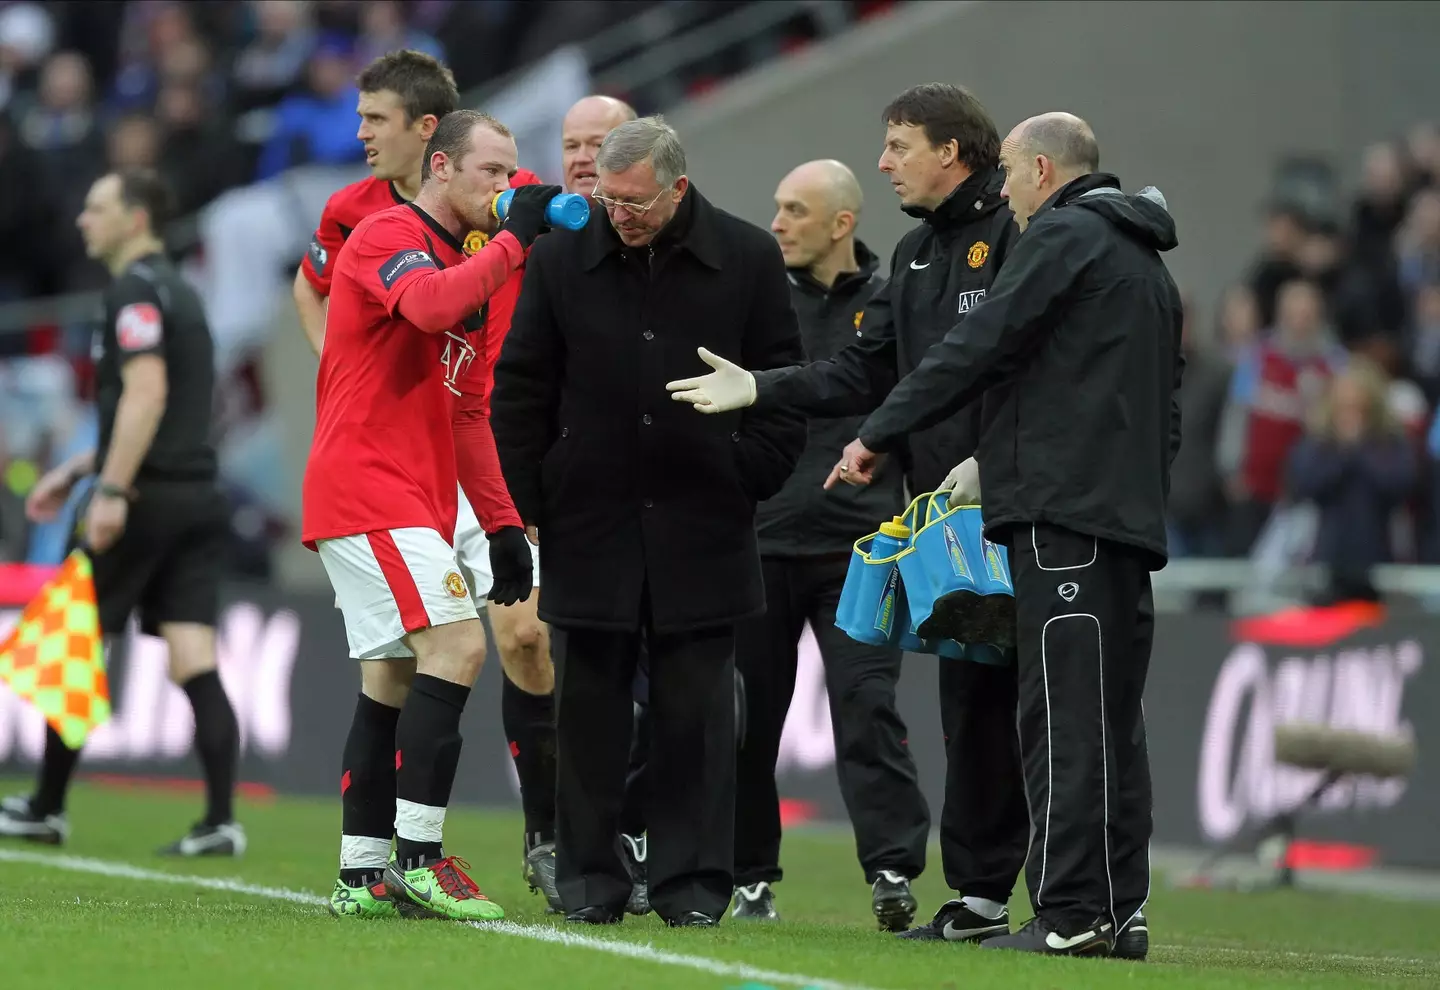 Wayne Rooney enjoyed a trophy-laden playing career with Manchester United under Sir Alex Ferguson.